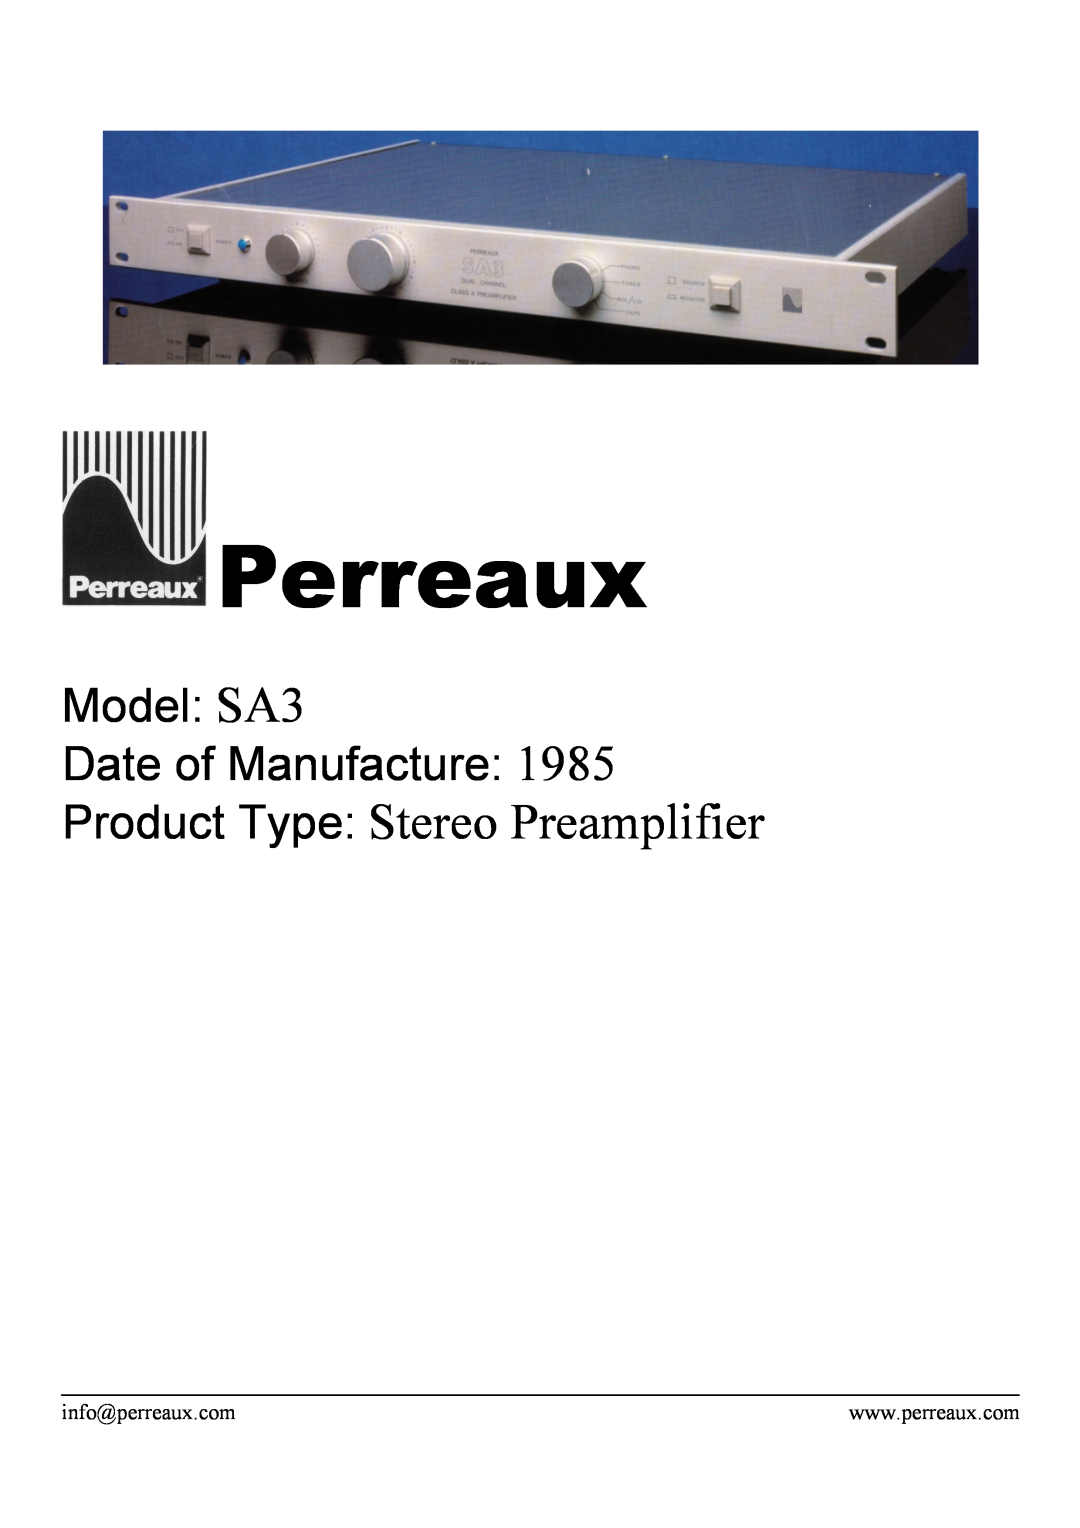 Perreaux manual Perreaux, Product Type Stereo Preamplifier, Model SA3 Date of Manufacture 